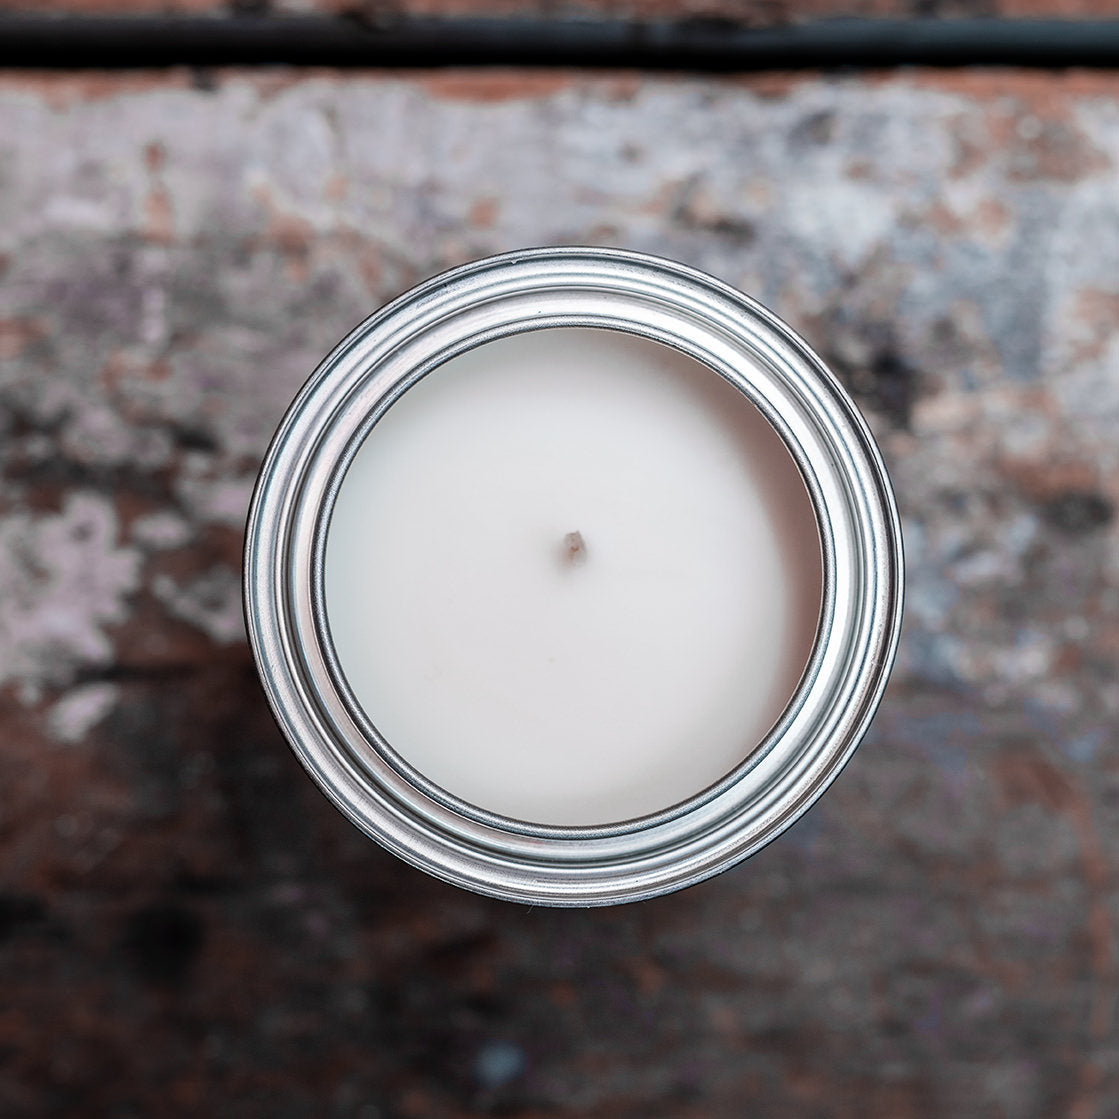 Overhead view of gender neutral tin candle on wooden shelf